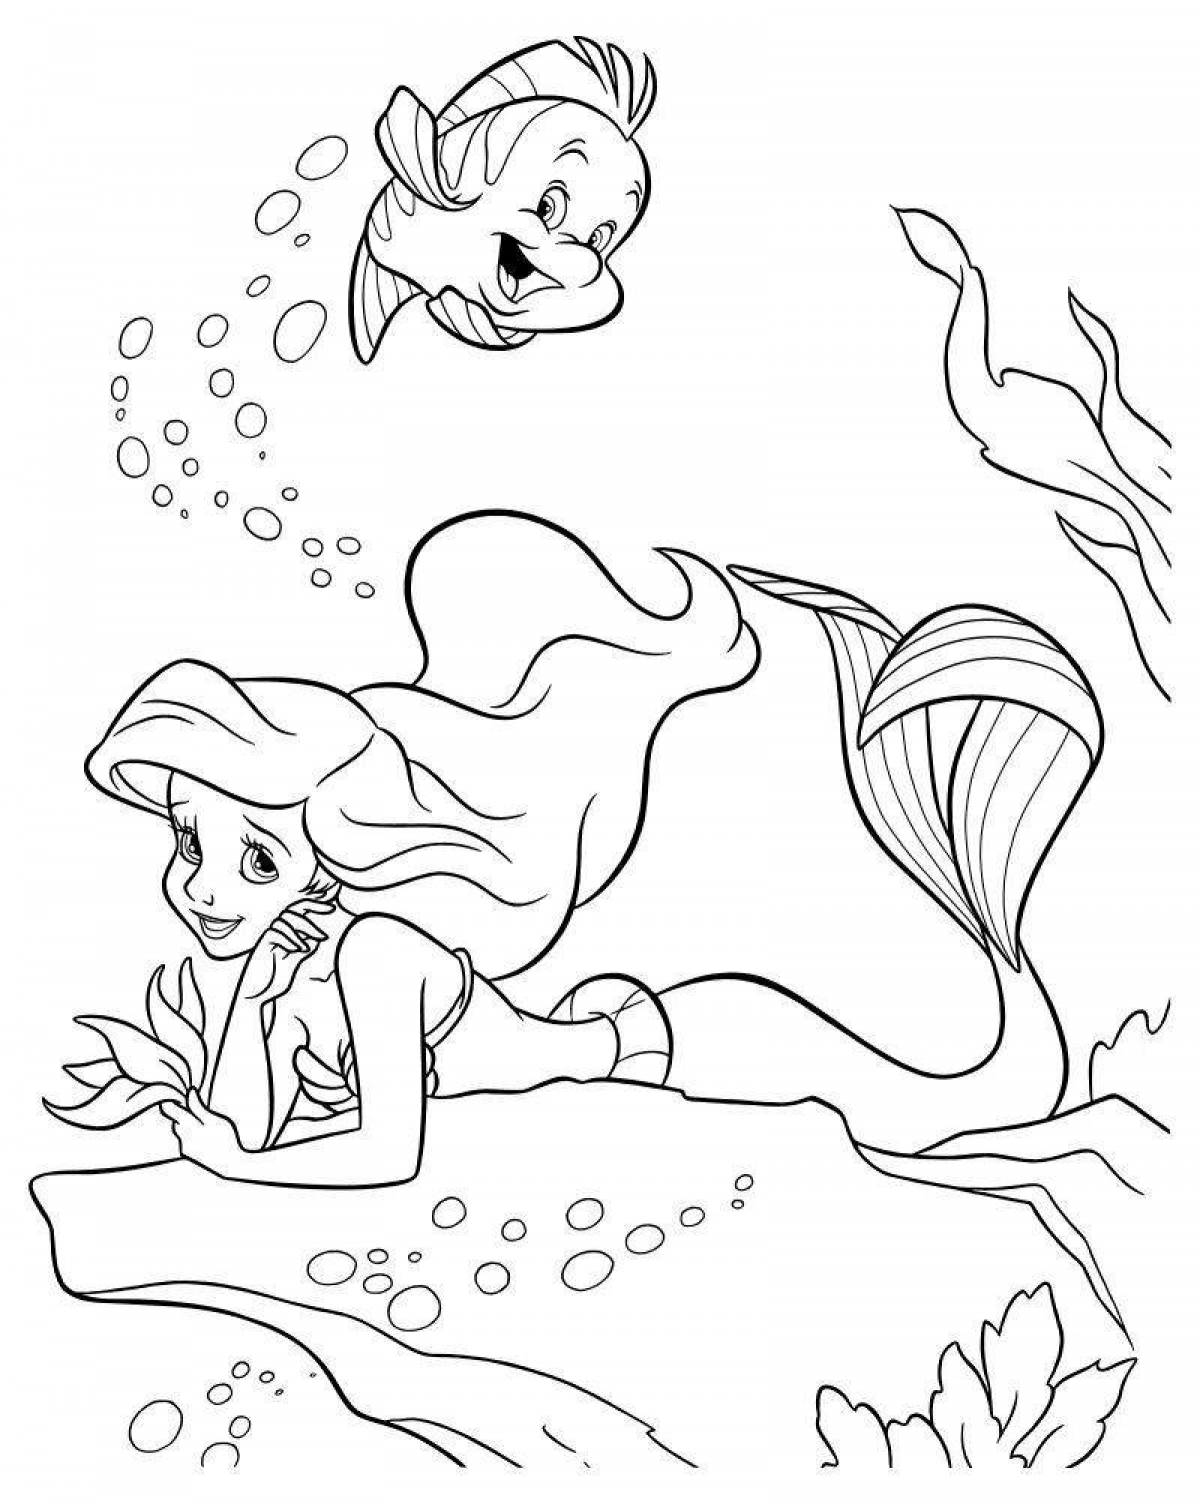 Coloring ariel for kids